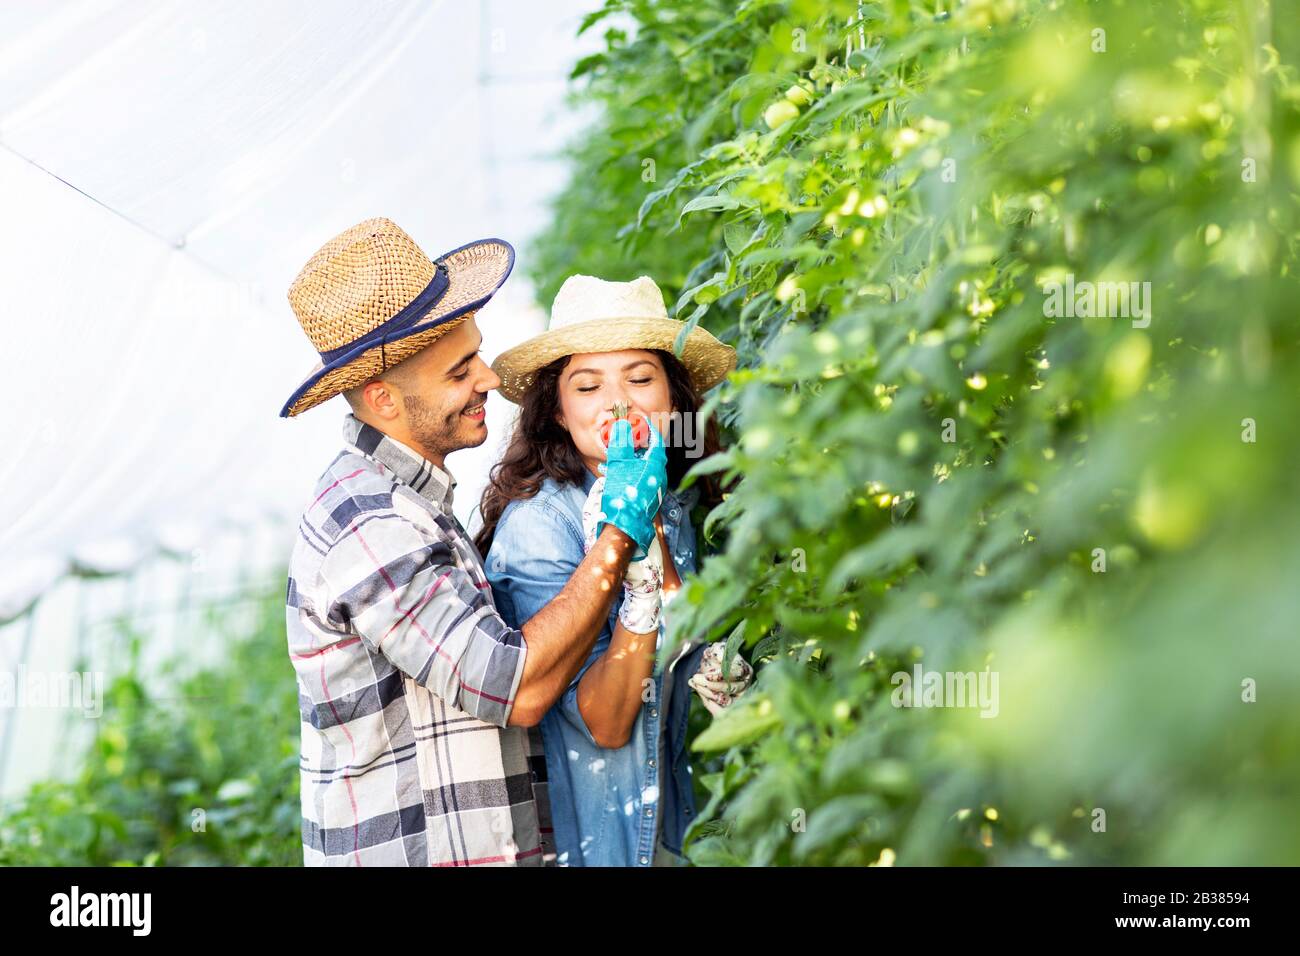 Two workers in green tomato plant farm Stock Photo